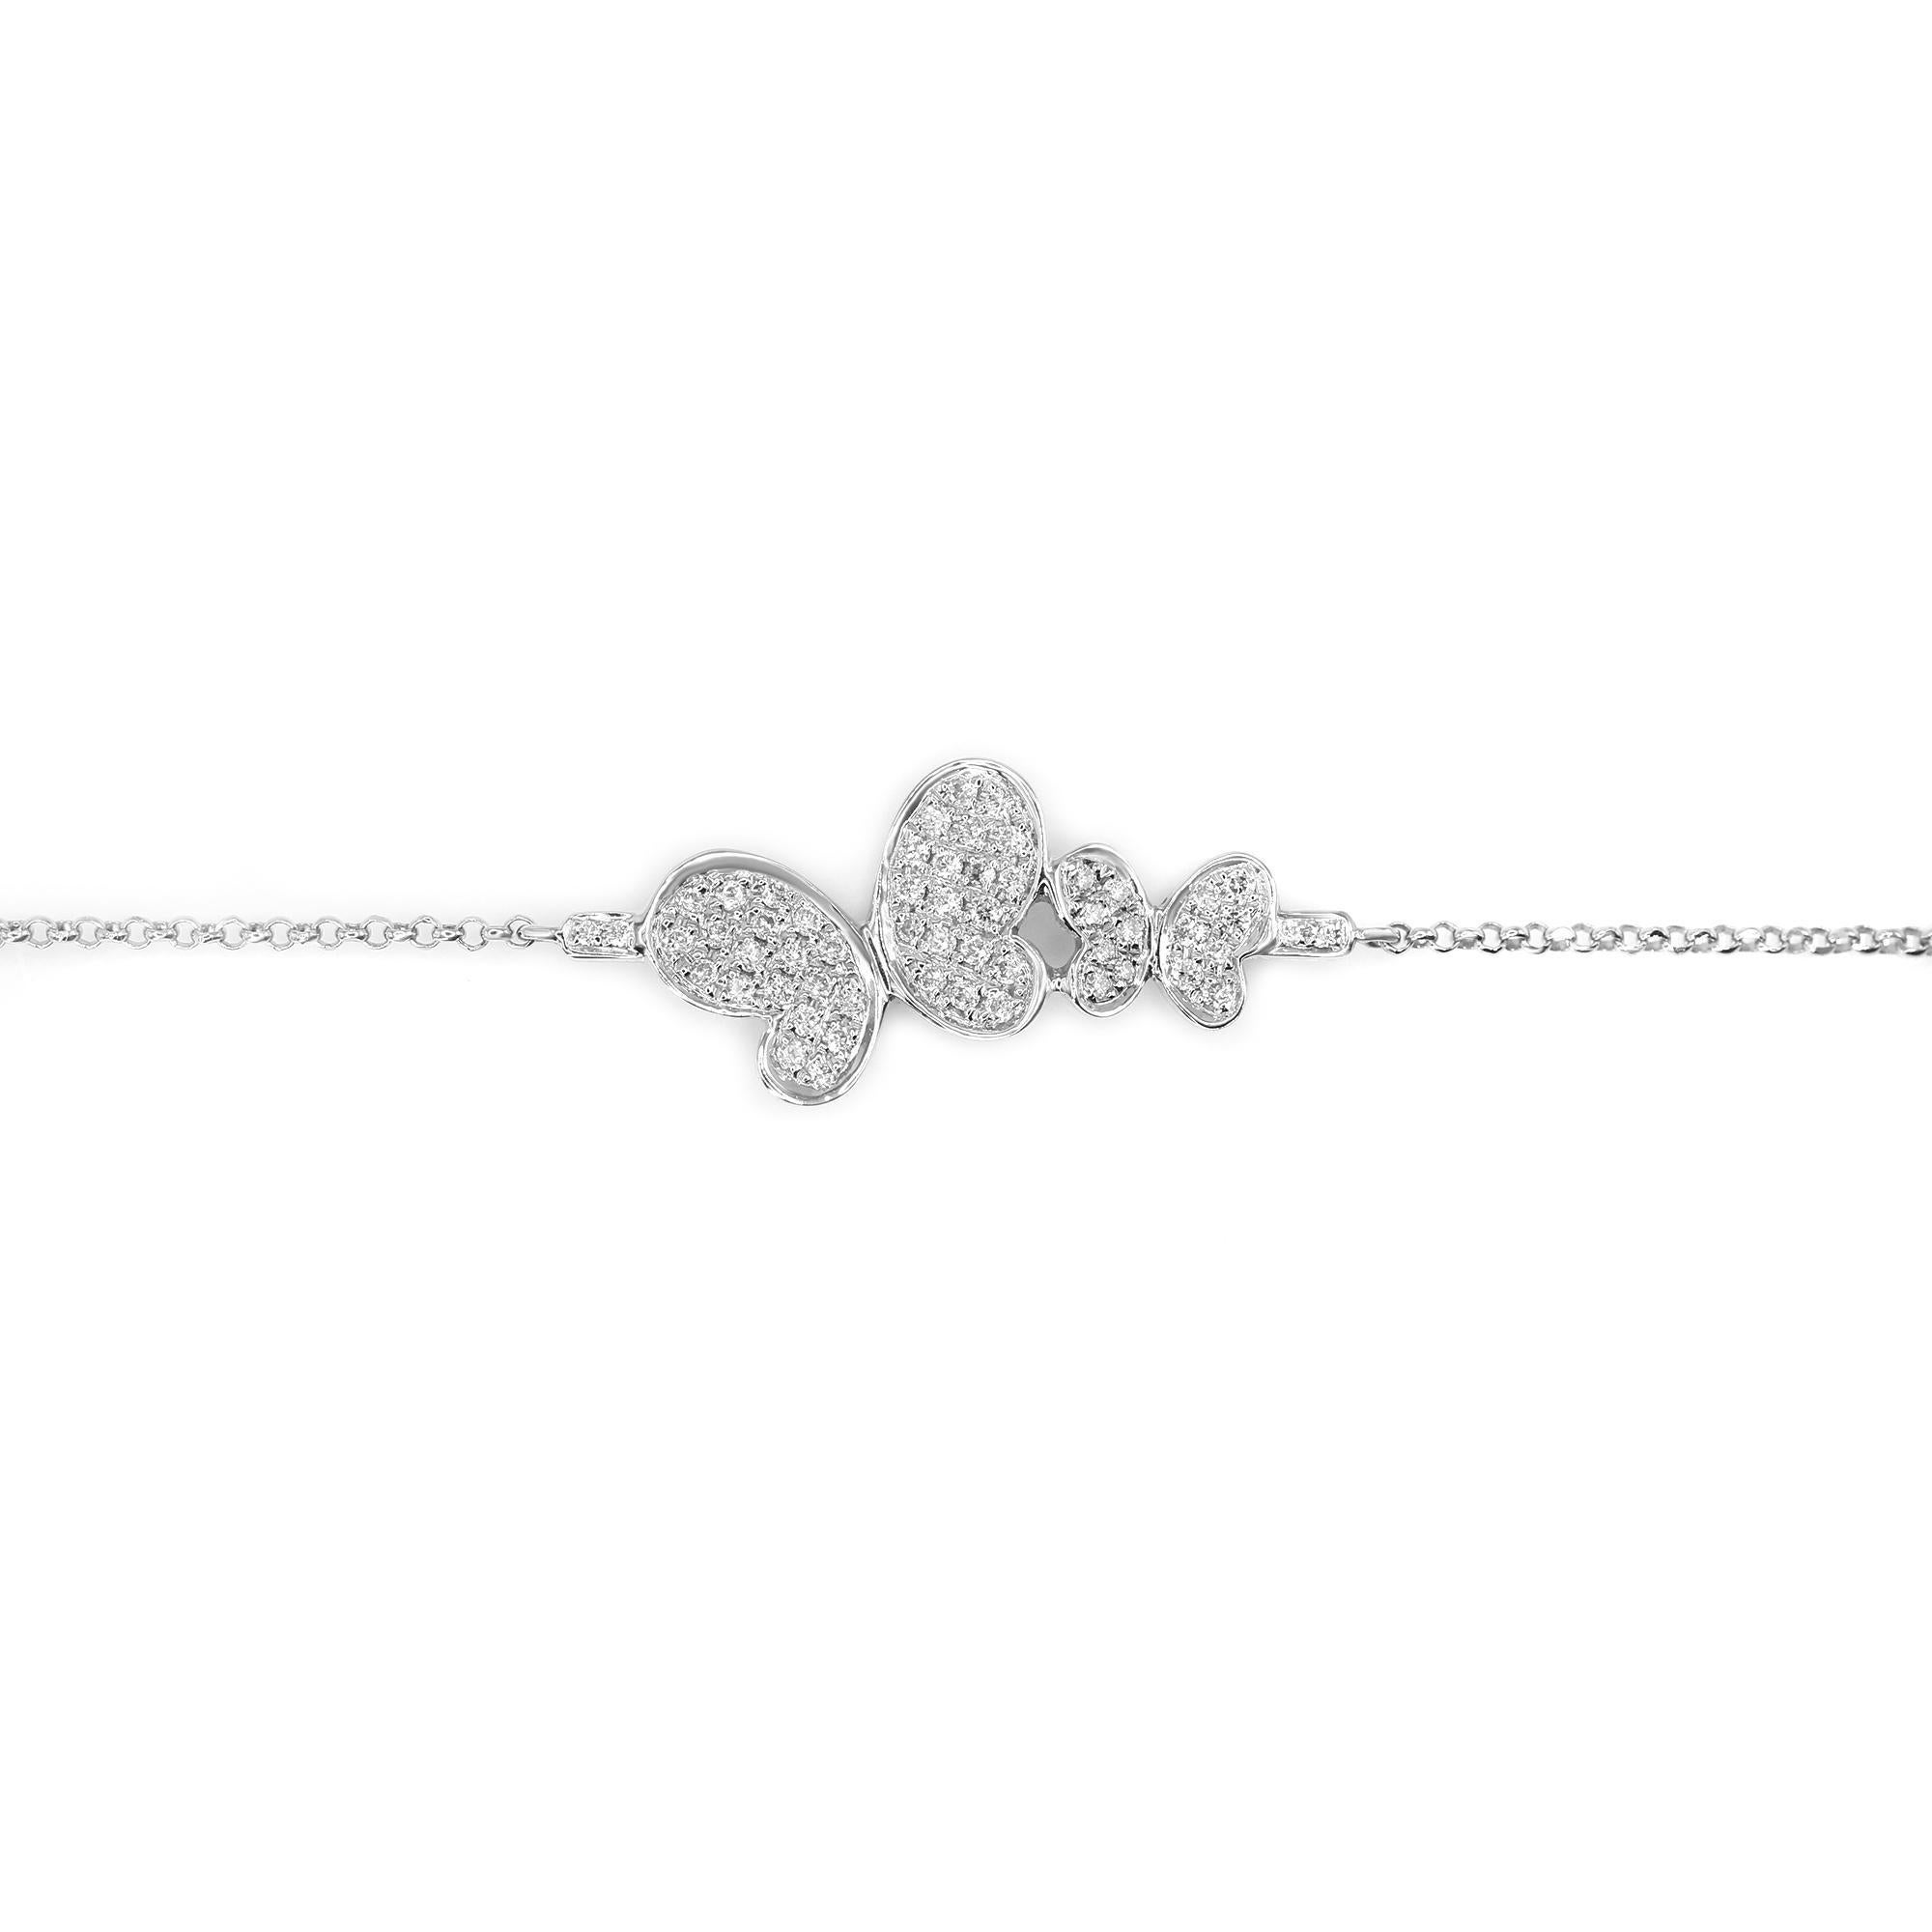 Butterflies are deep & powerful representations of life. Shop our special two diamond Butterfly chain bracelet in 18k white gold. This piece features 0.36cttw of round cut diamonds. Diamond color I and SI-I clarity. Length: 7.25 inches. Adjustable